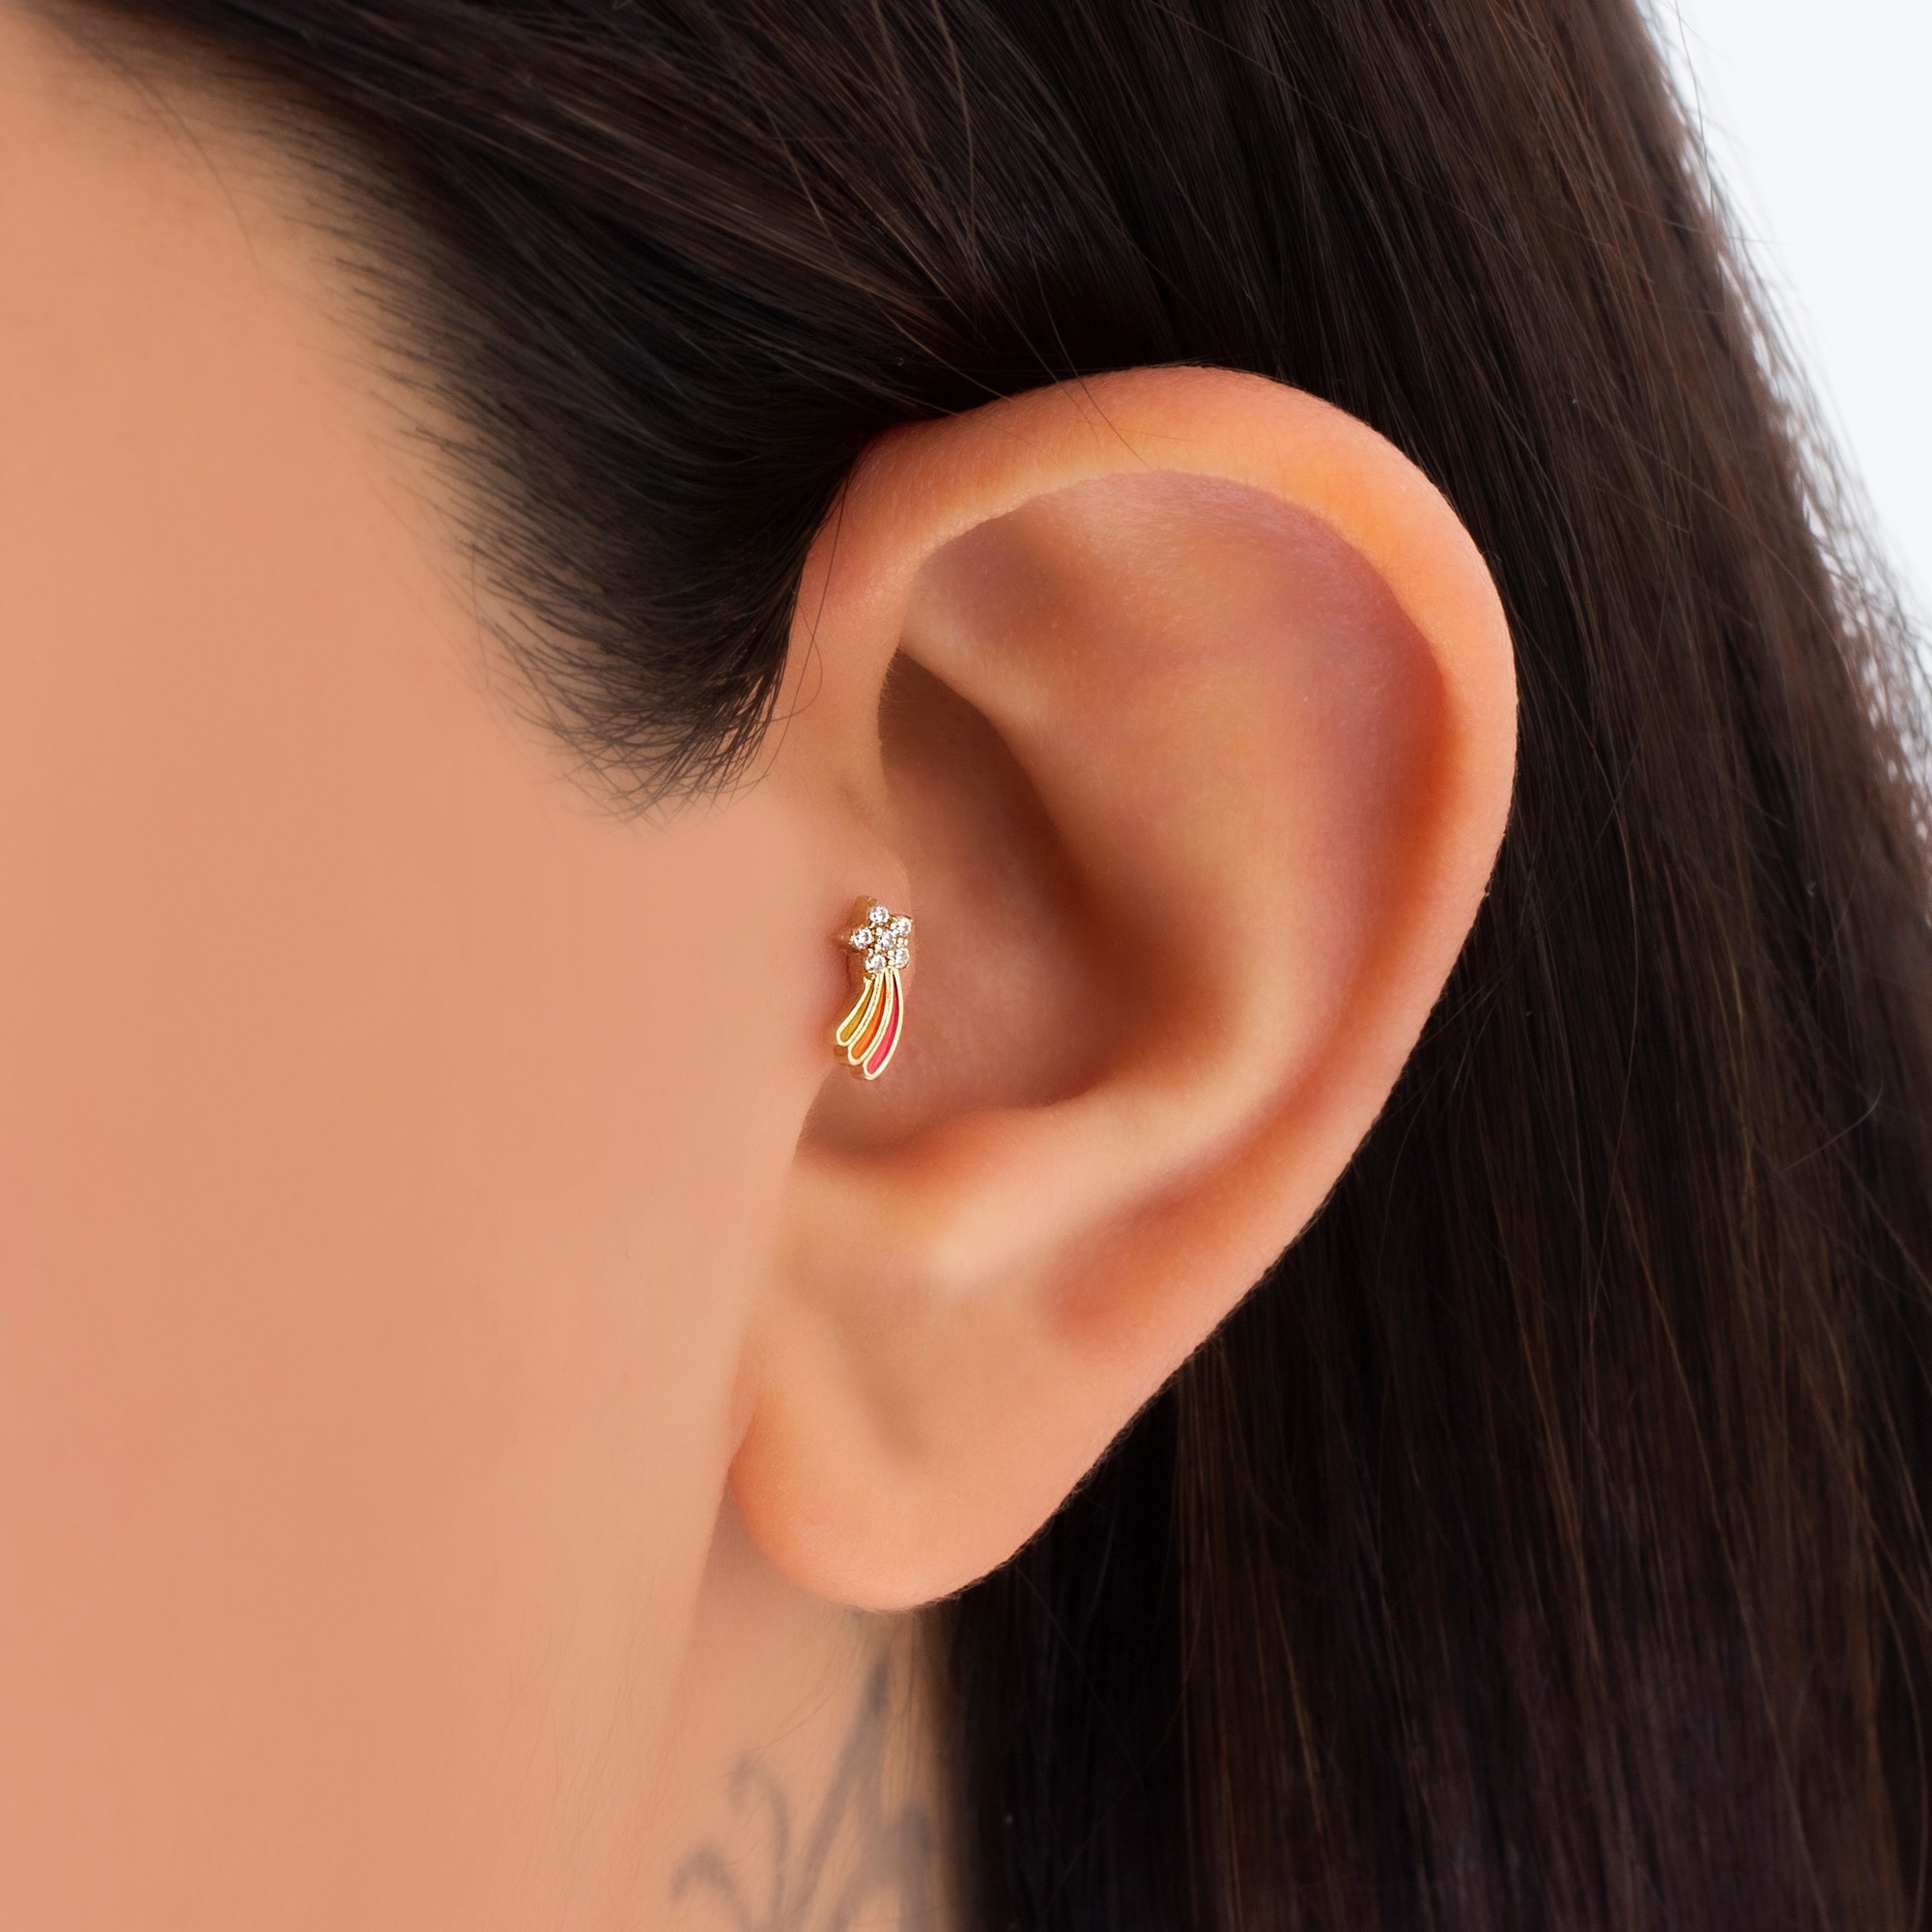 14 Carat Gold Colored Shooting Star Piercing